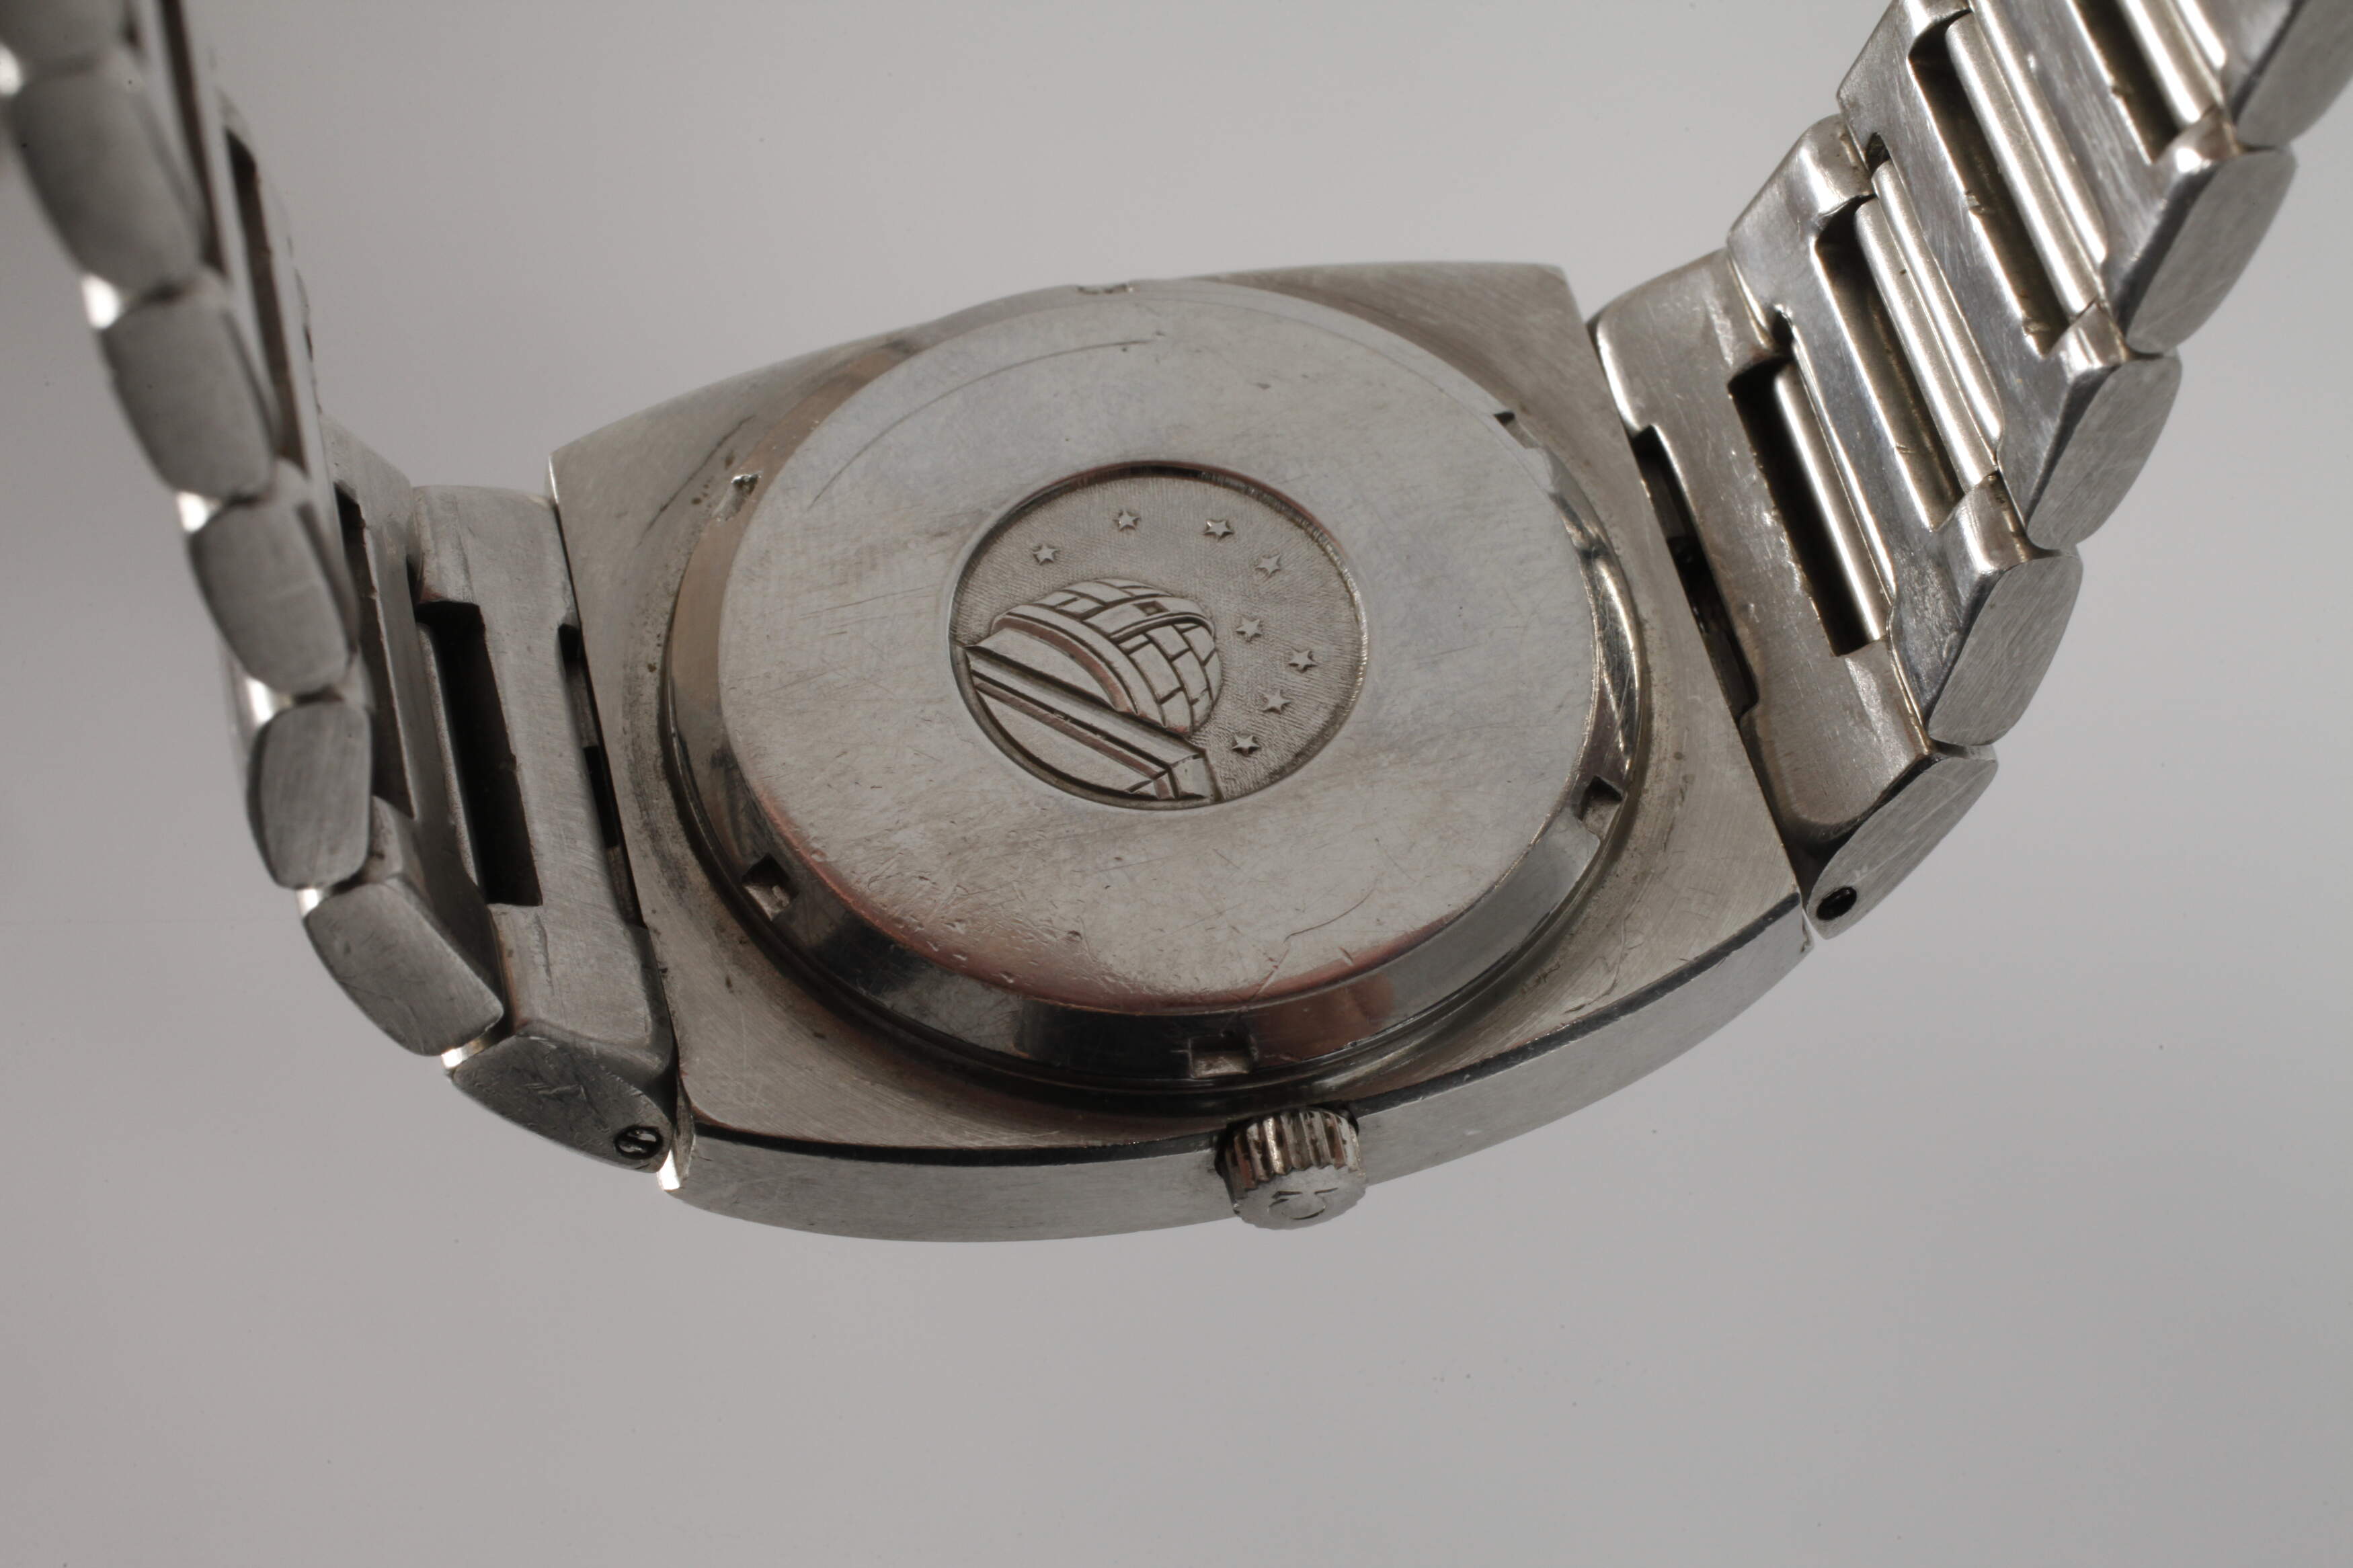 Men's watch Omega Constellation - Image 2 of 4